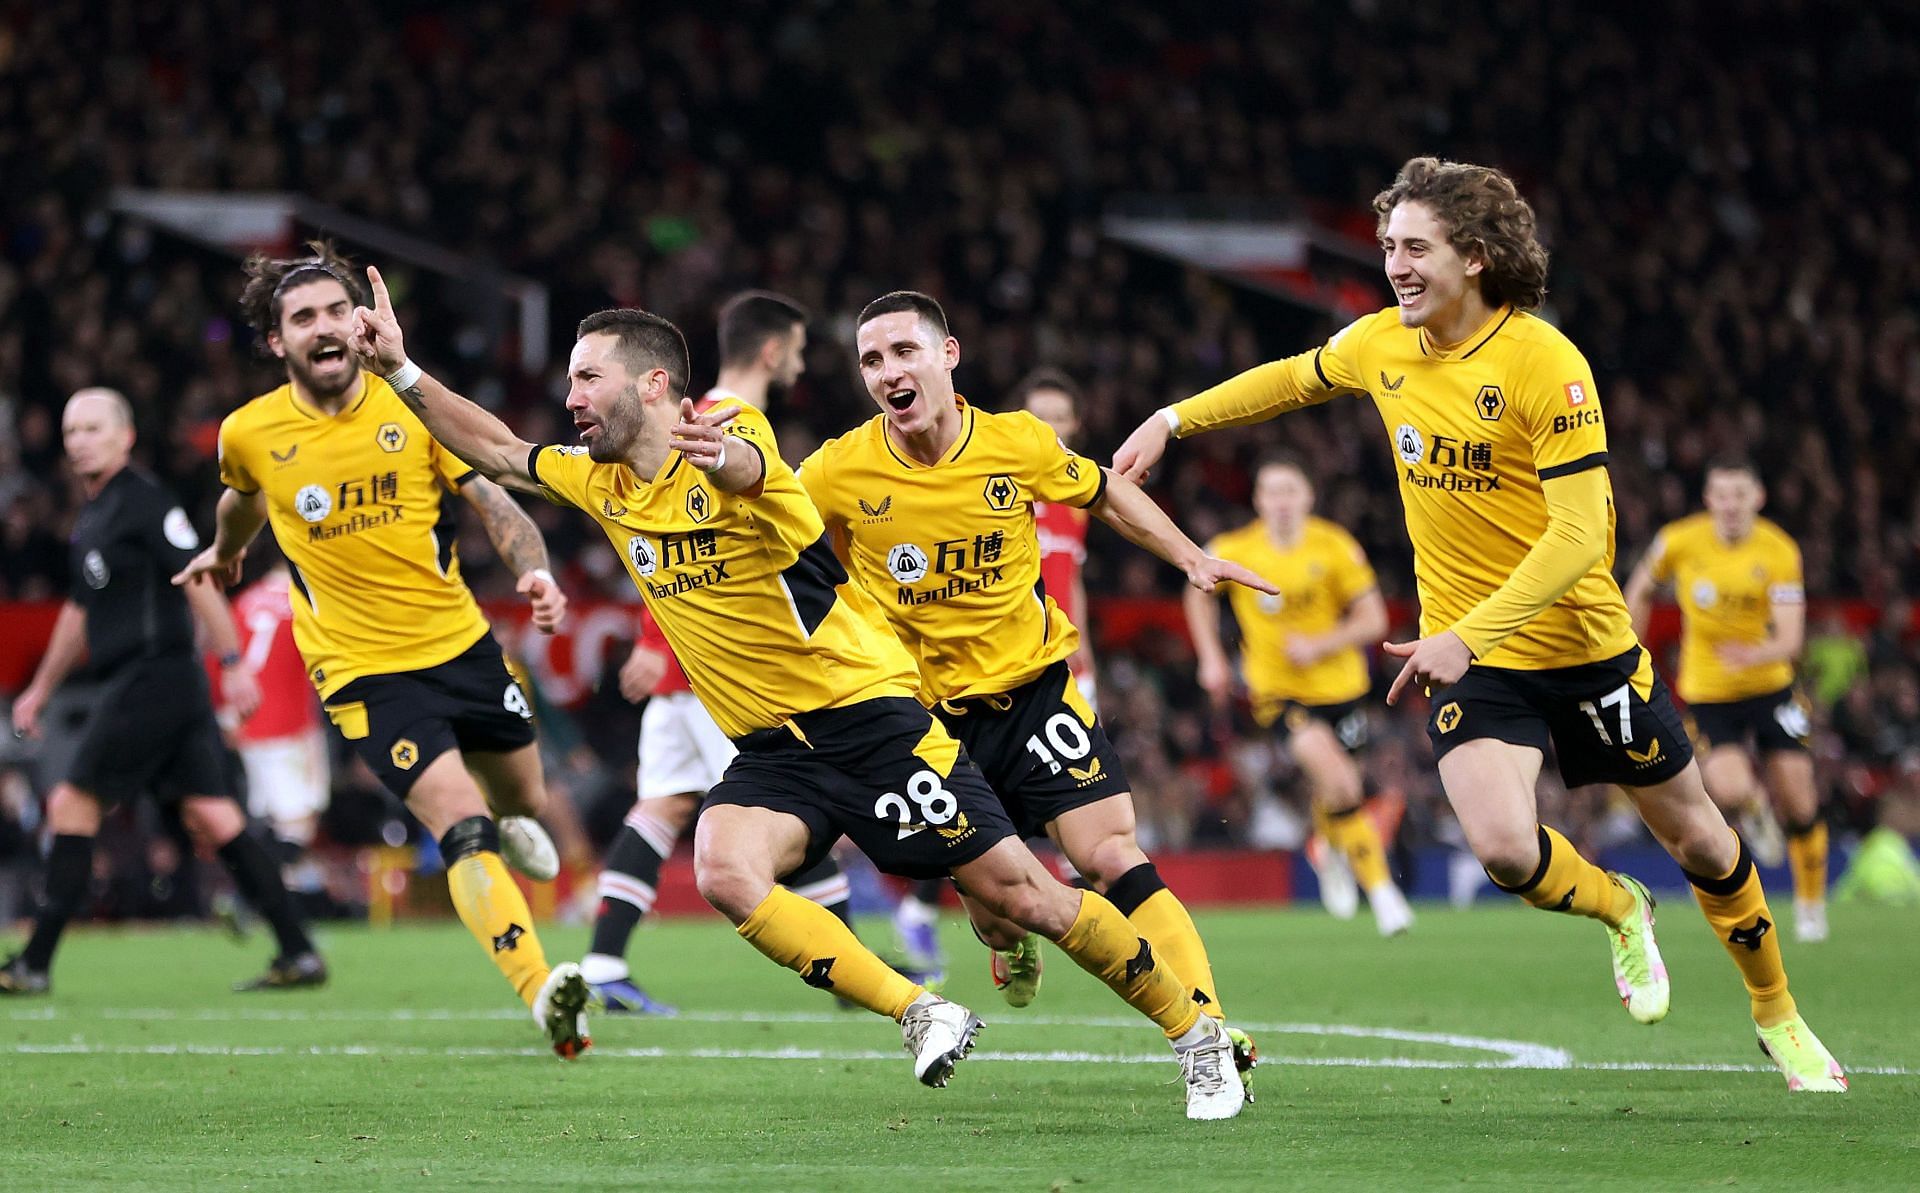 Joao Moutinho (second from left) scored a stunning goal to win the game